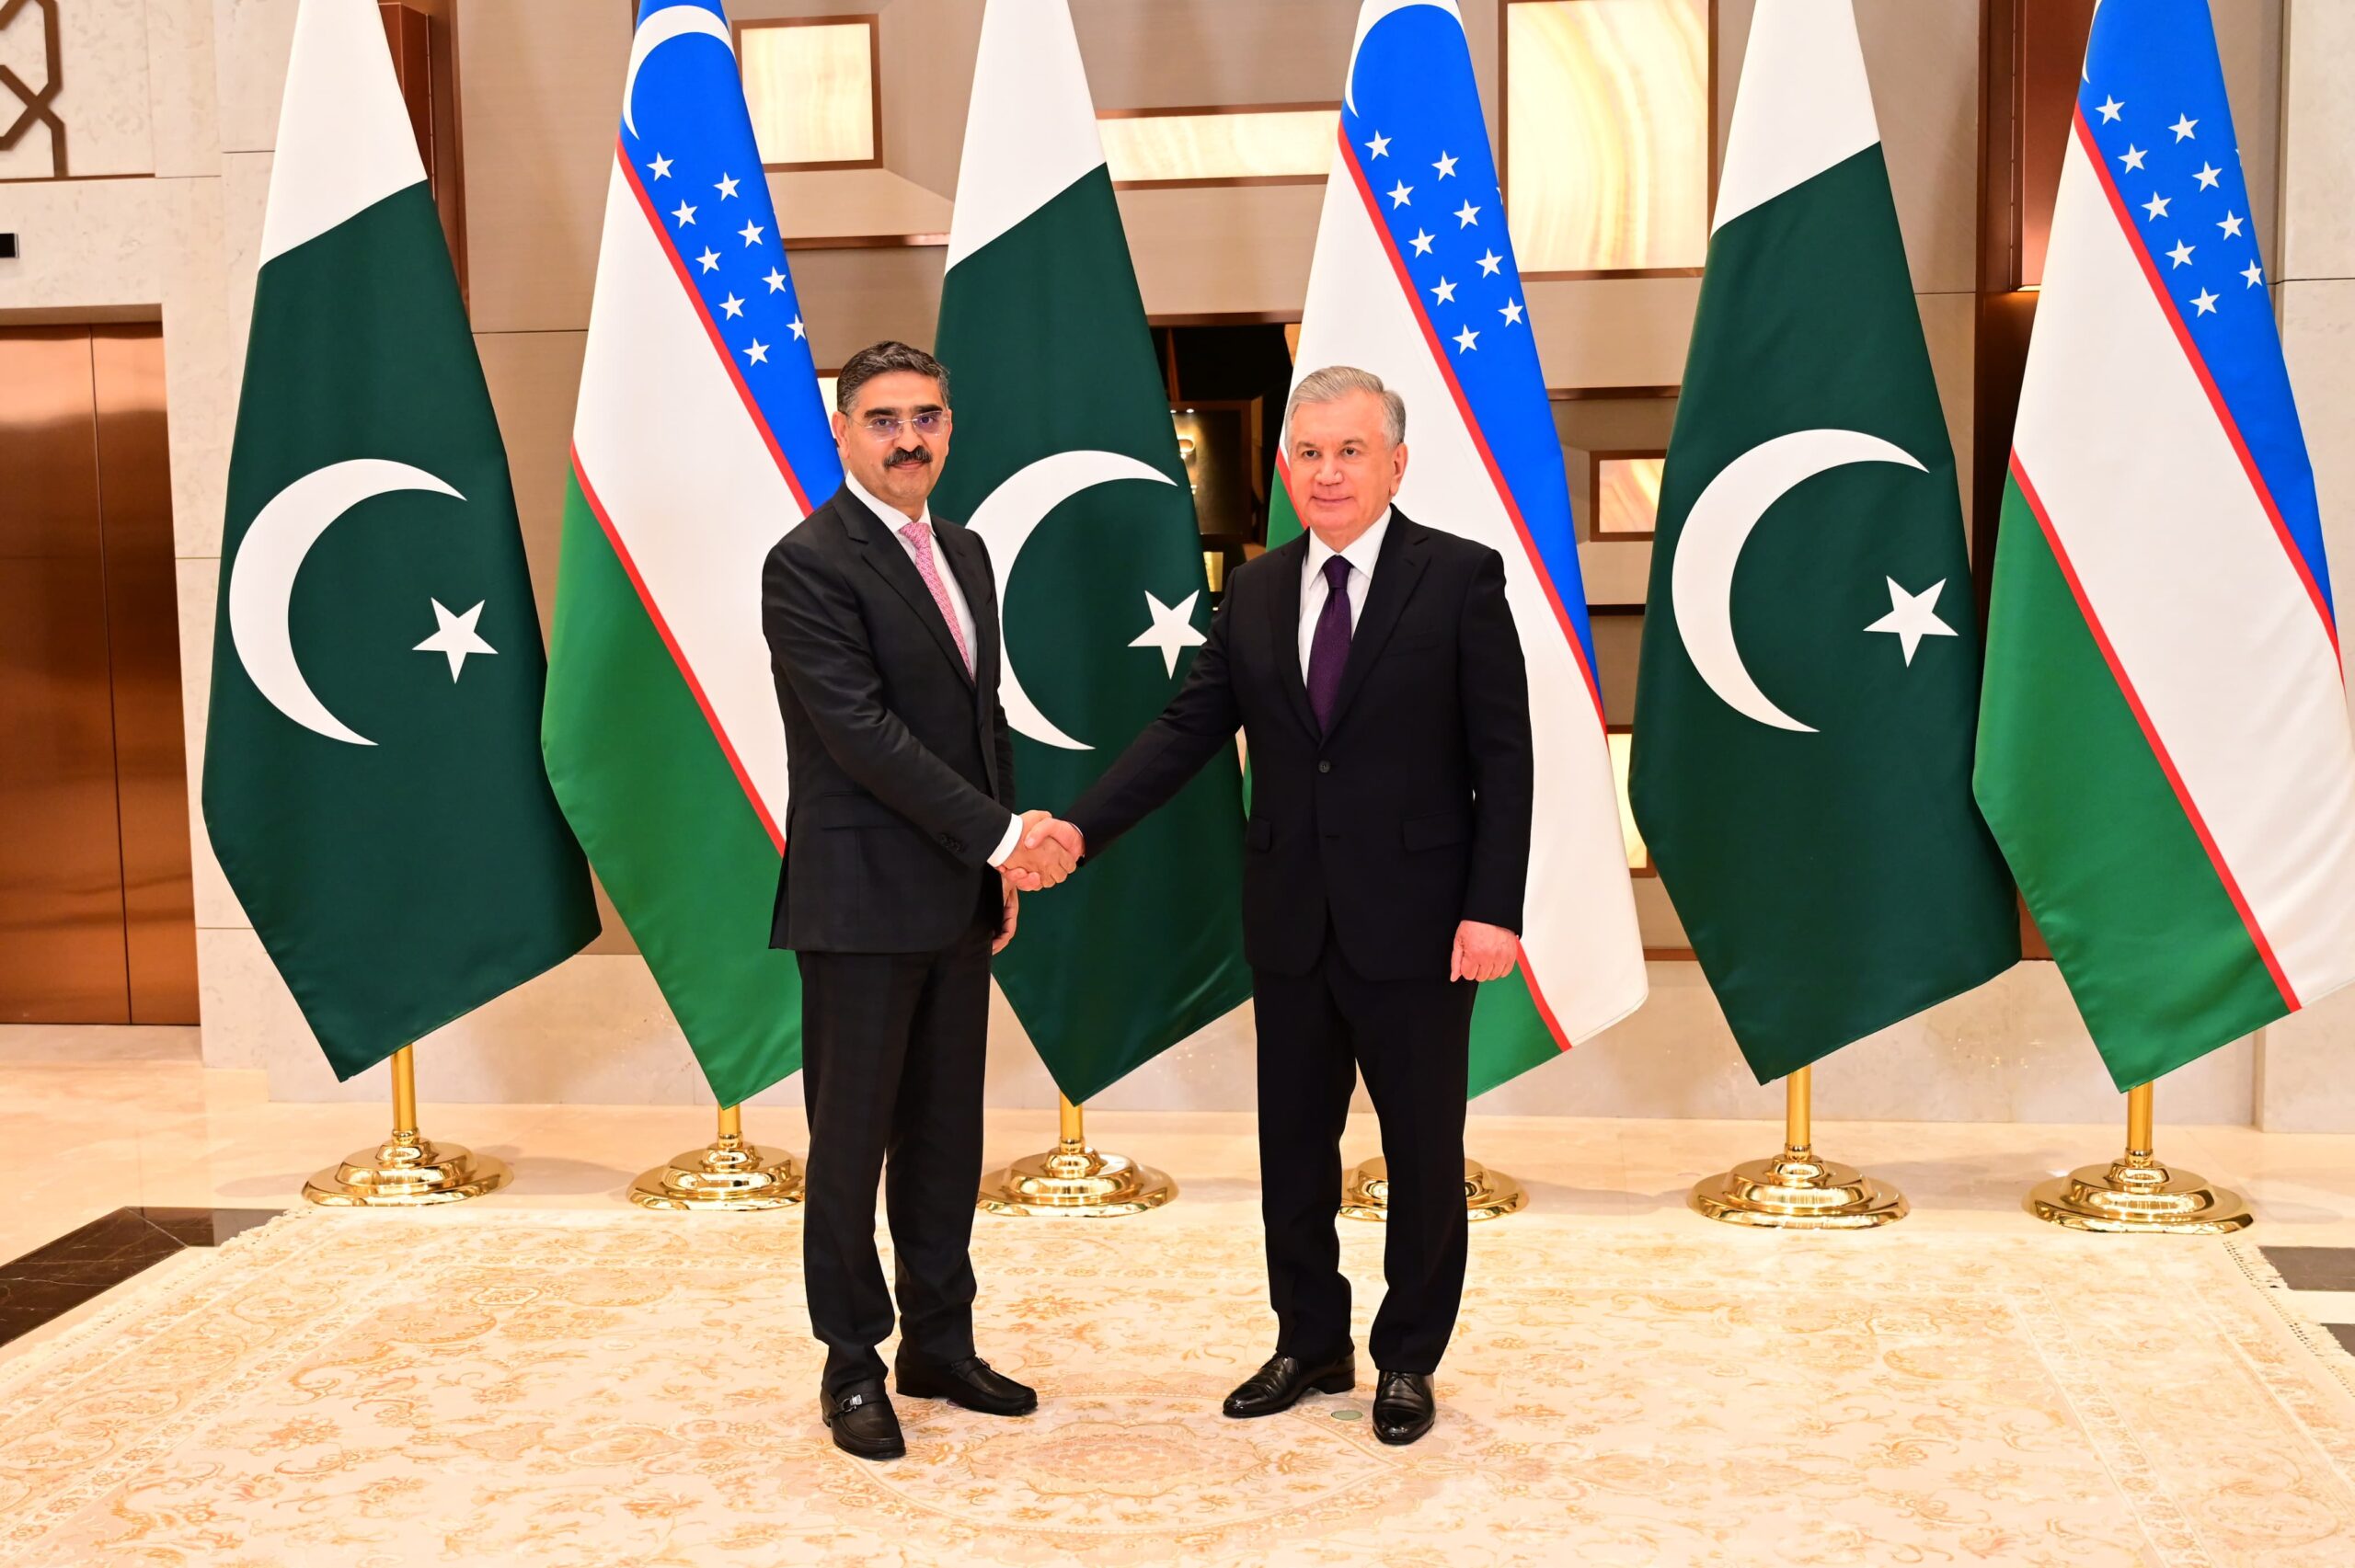 Prime Minister’s Bilateral Meeting with the President of the Republic of Uzbekistan